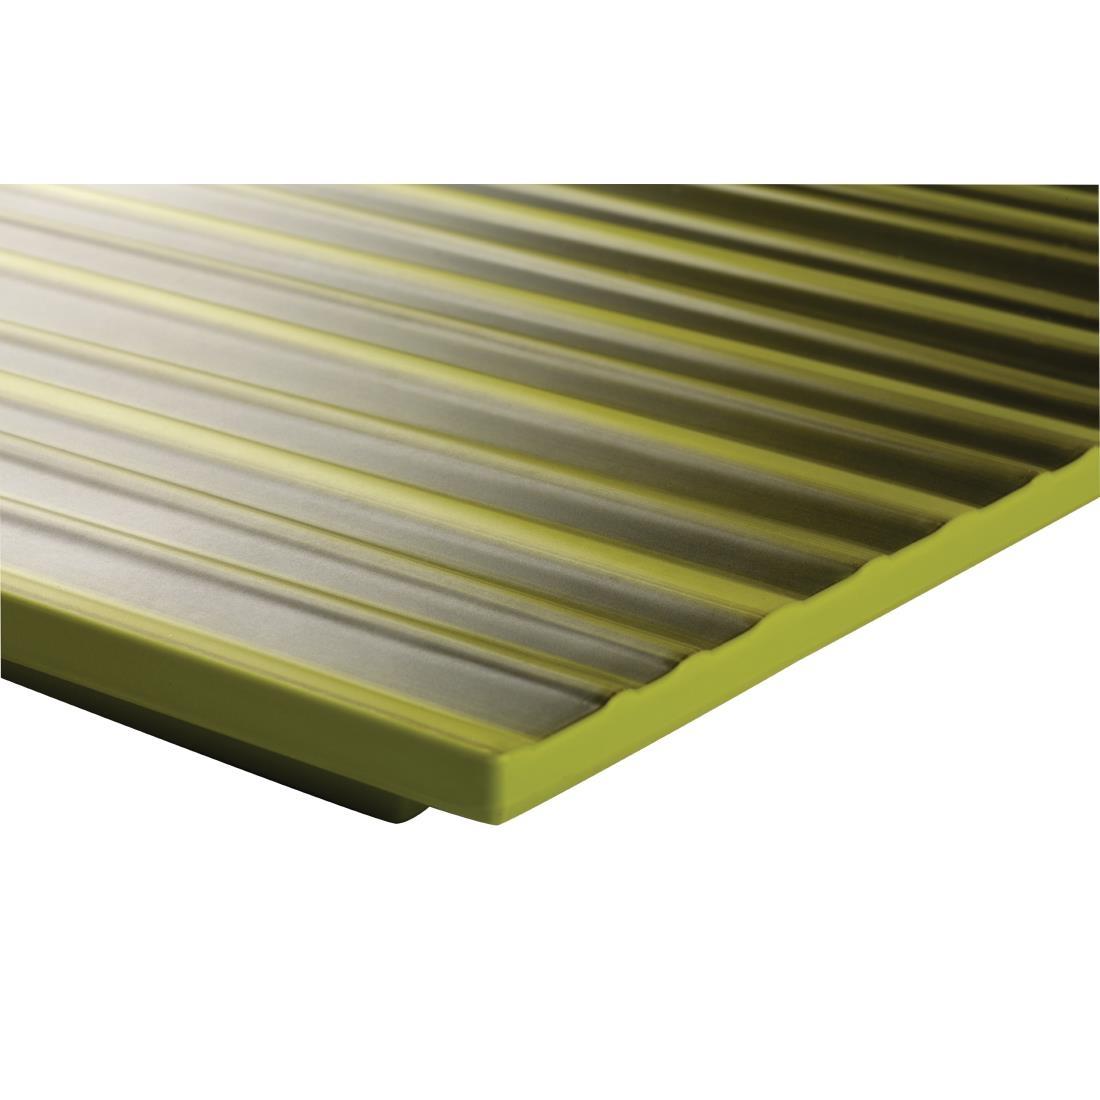 APS Asia+ Bamboo Leaf Tray GN 1/1 - DT758  - 2